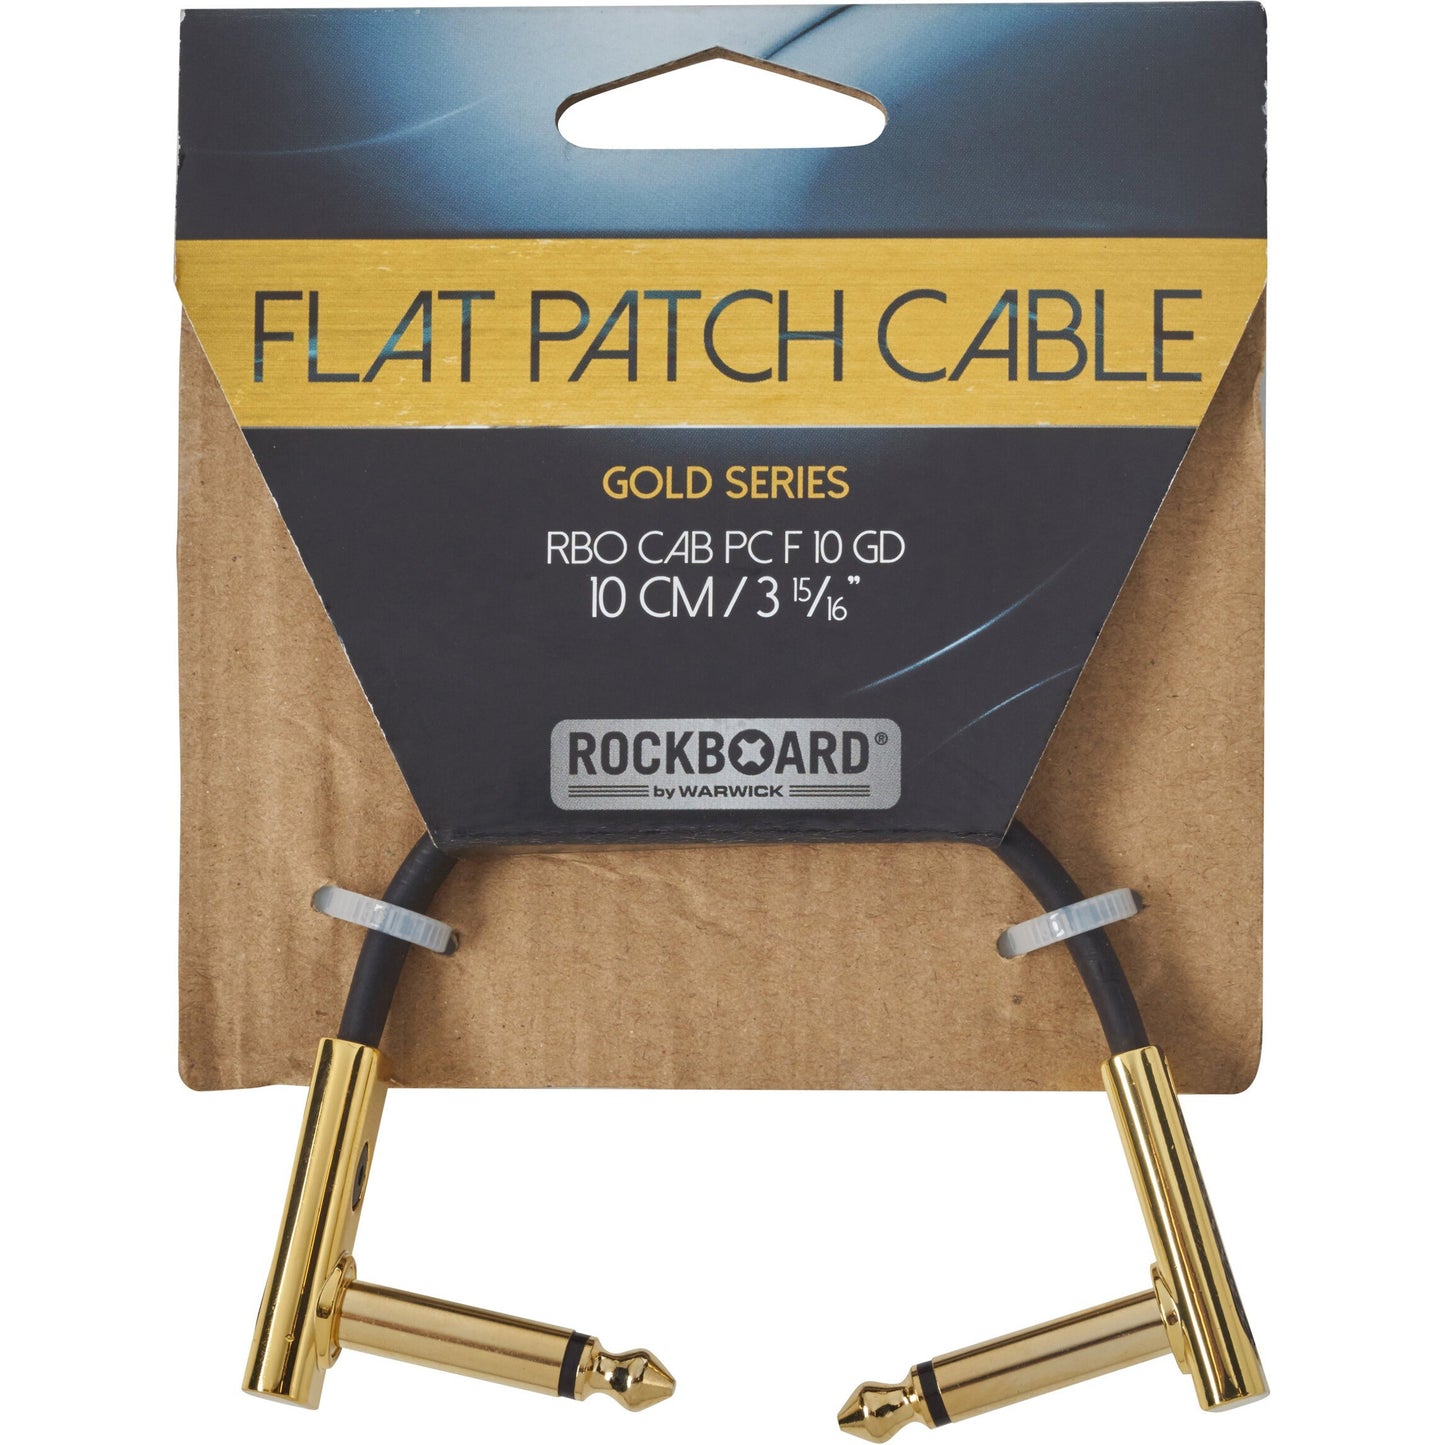 RockBoard Gold Series Flat Patch Cable, Black, 3.94 Inch / 10 cm